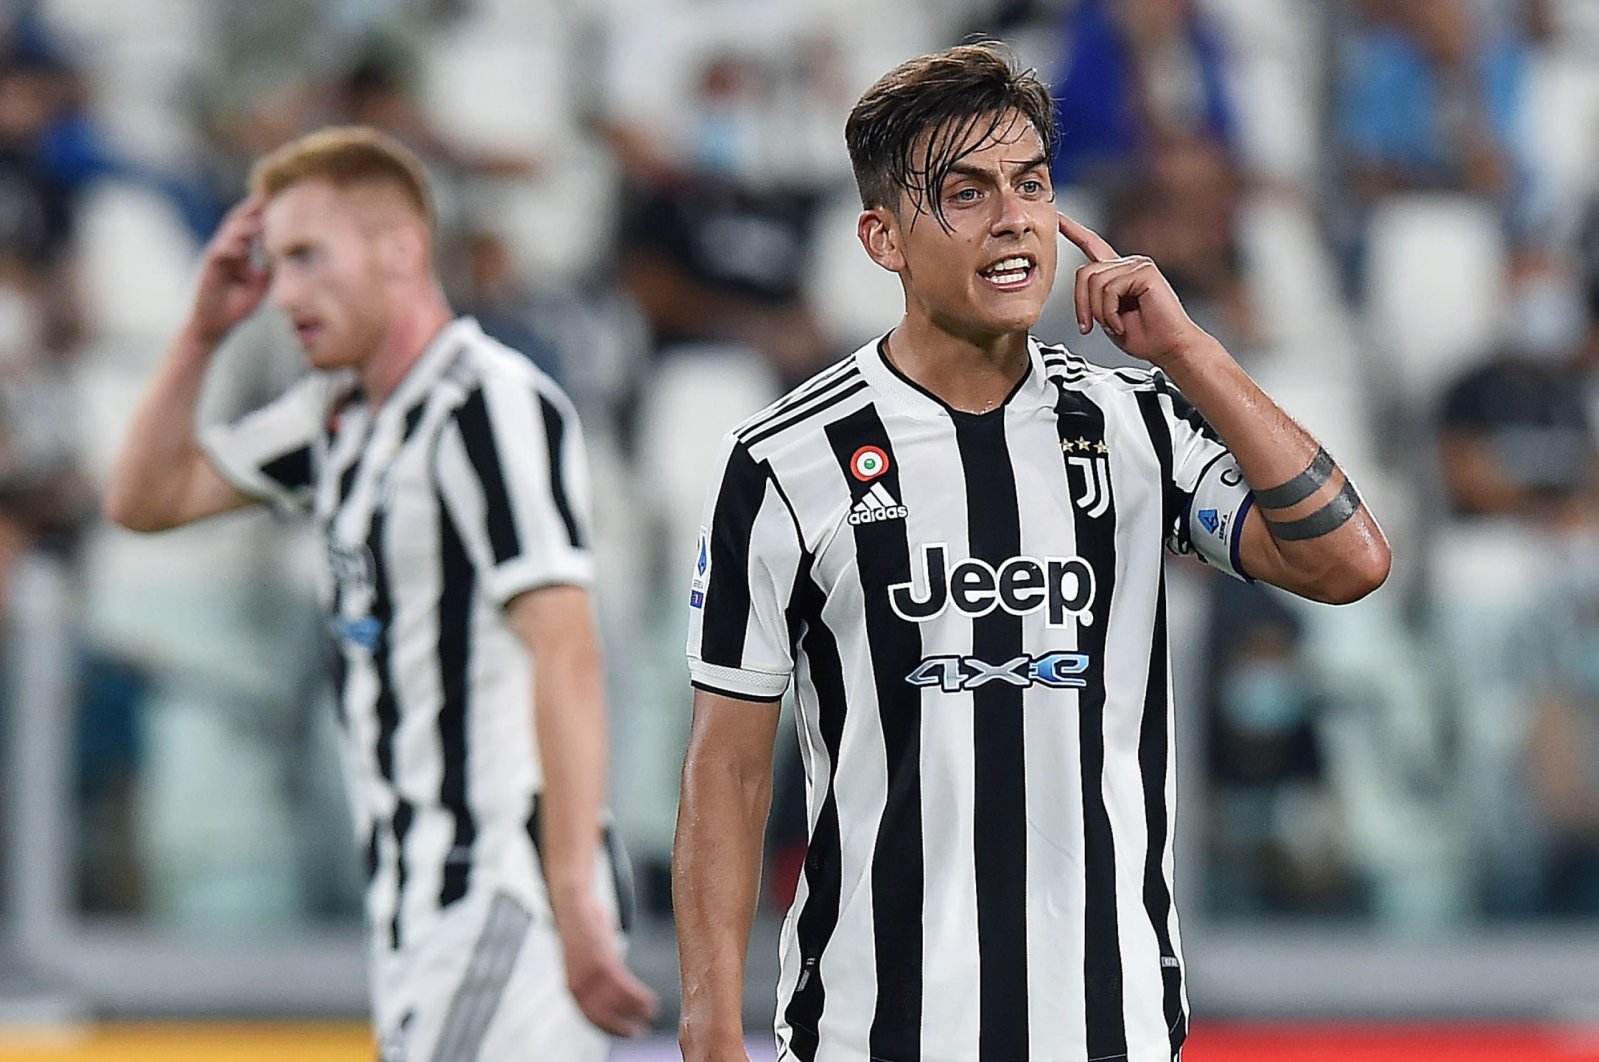 Juventus’ Paulo Dybala reacts during a Serie A match against Empoli at Allianz Stadium in Turin, Italy, Aug. 28, 2021. (EPA Photo)